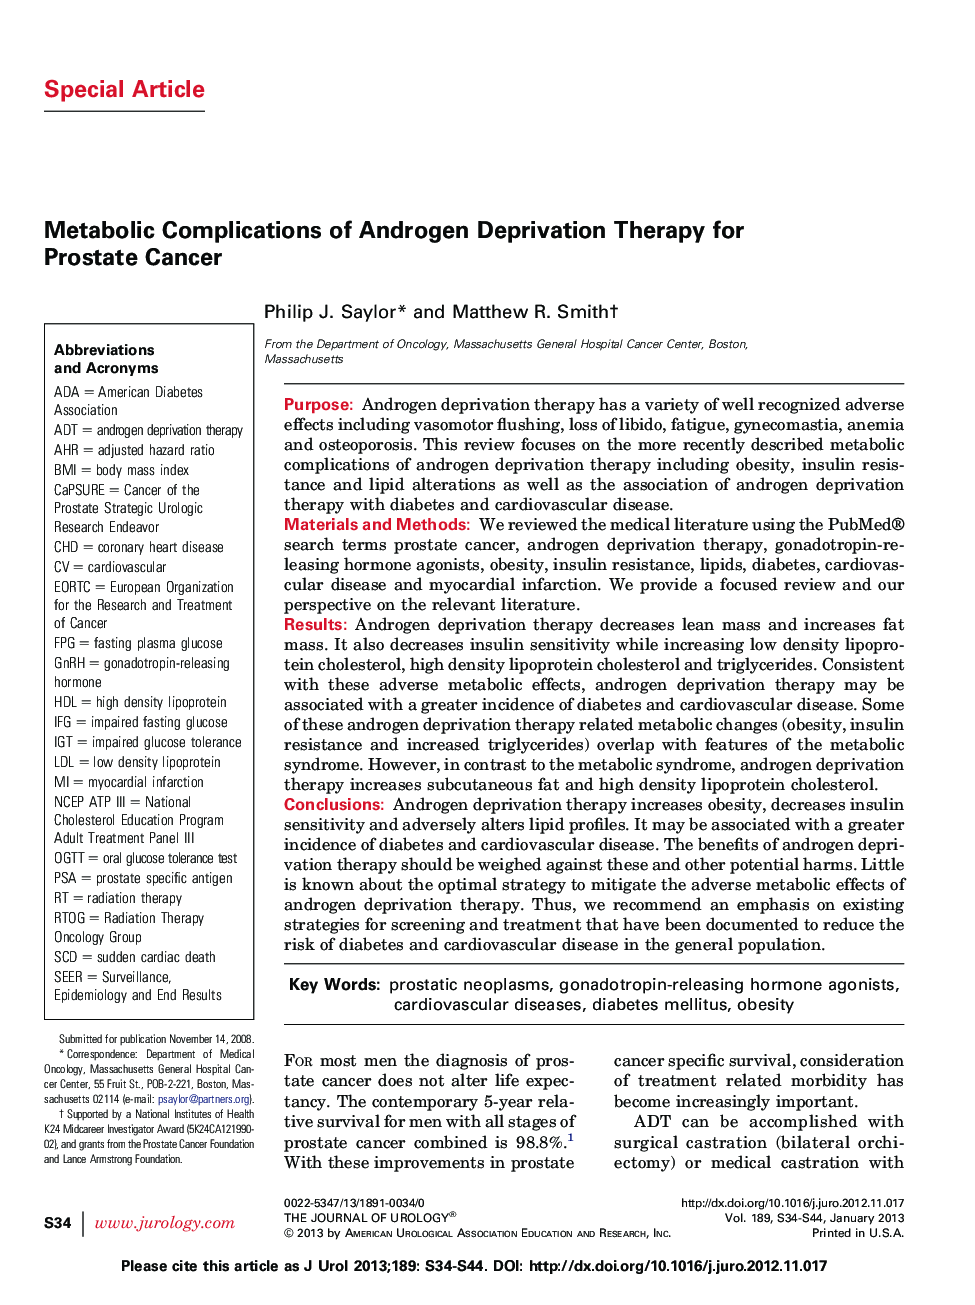 Metabolic Complications of Androgen Deprivation Therapy for Prostate Cancer